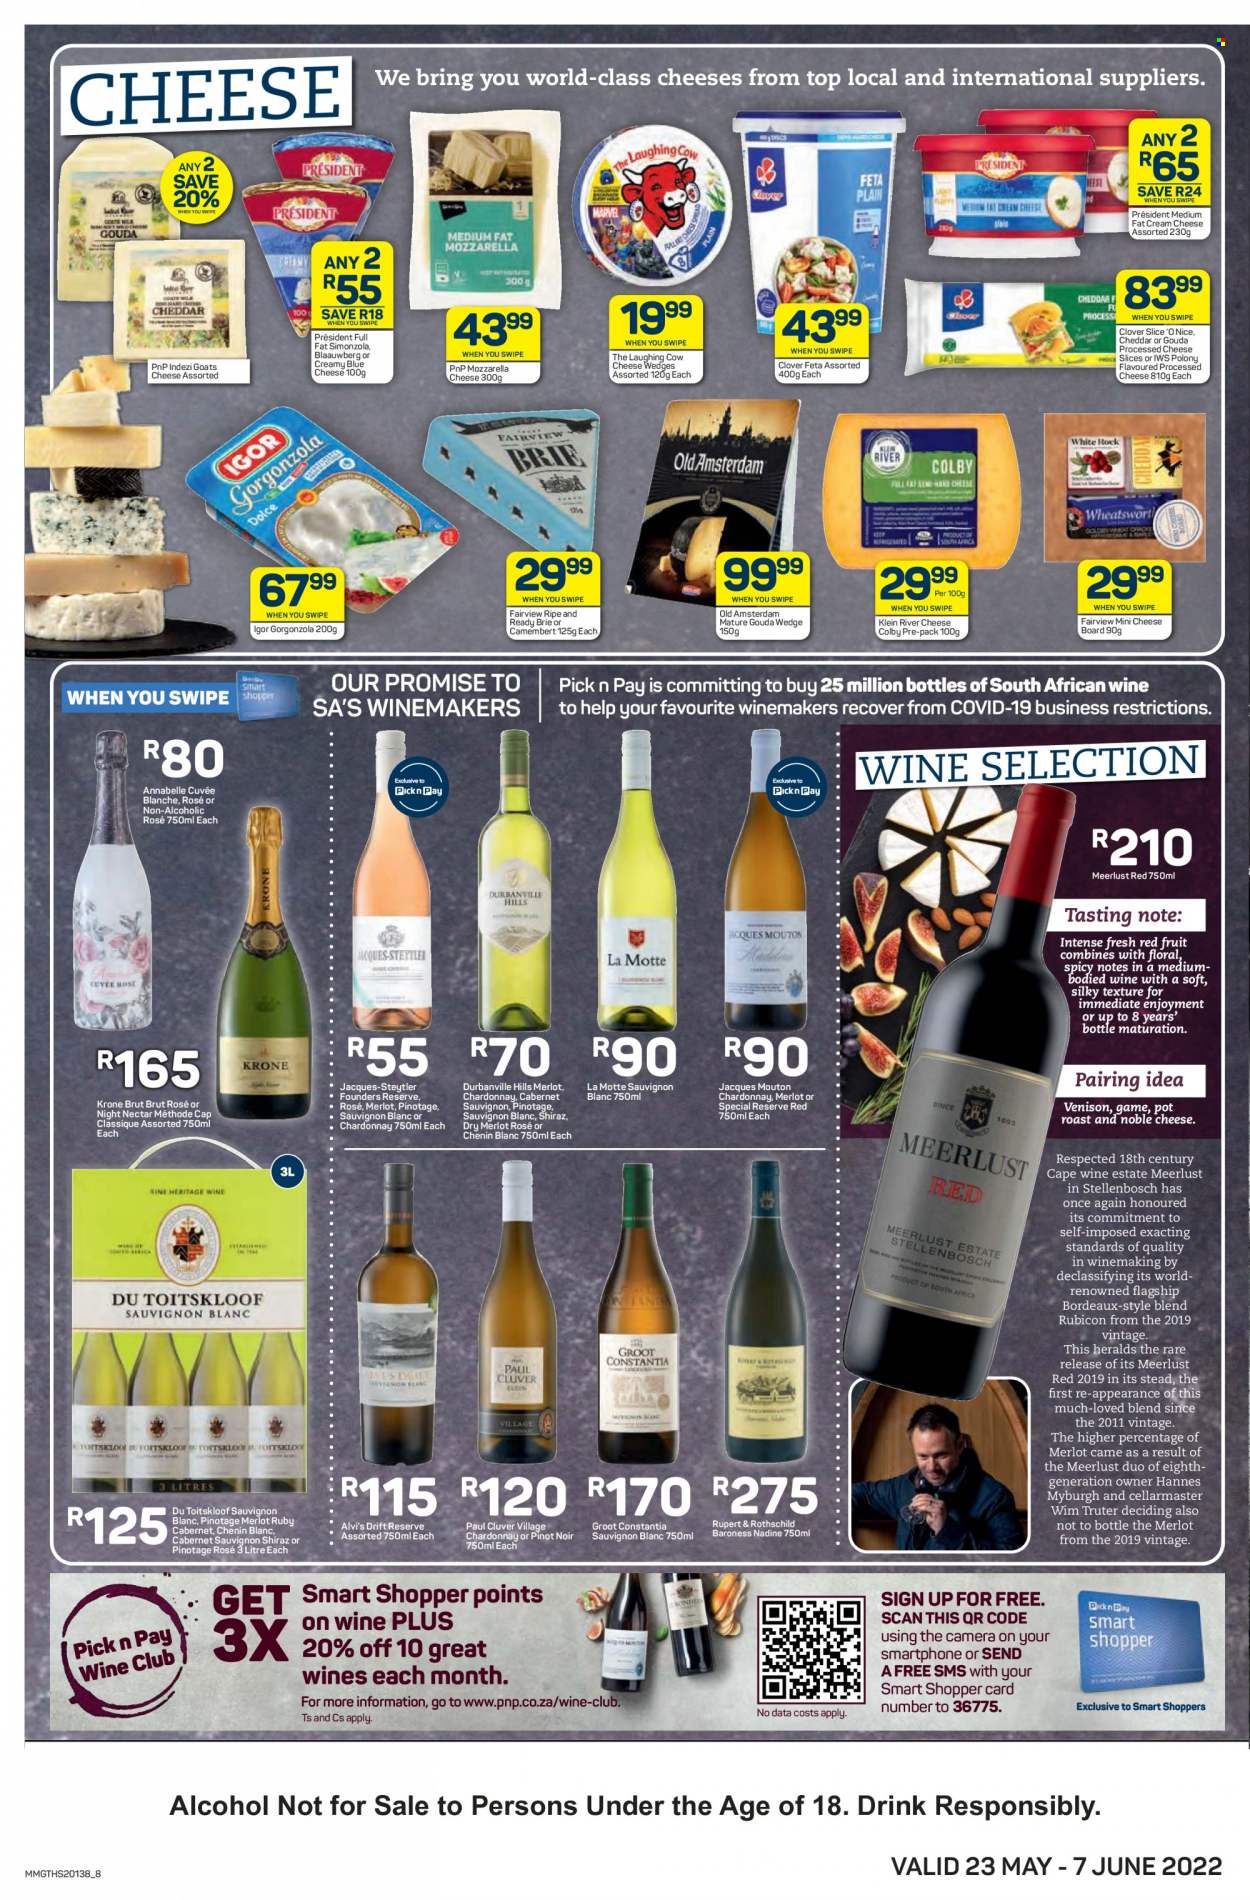 Pick n Pay specials - 05.23.2022 - 06.07.2022. 